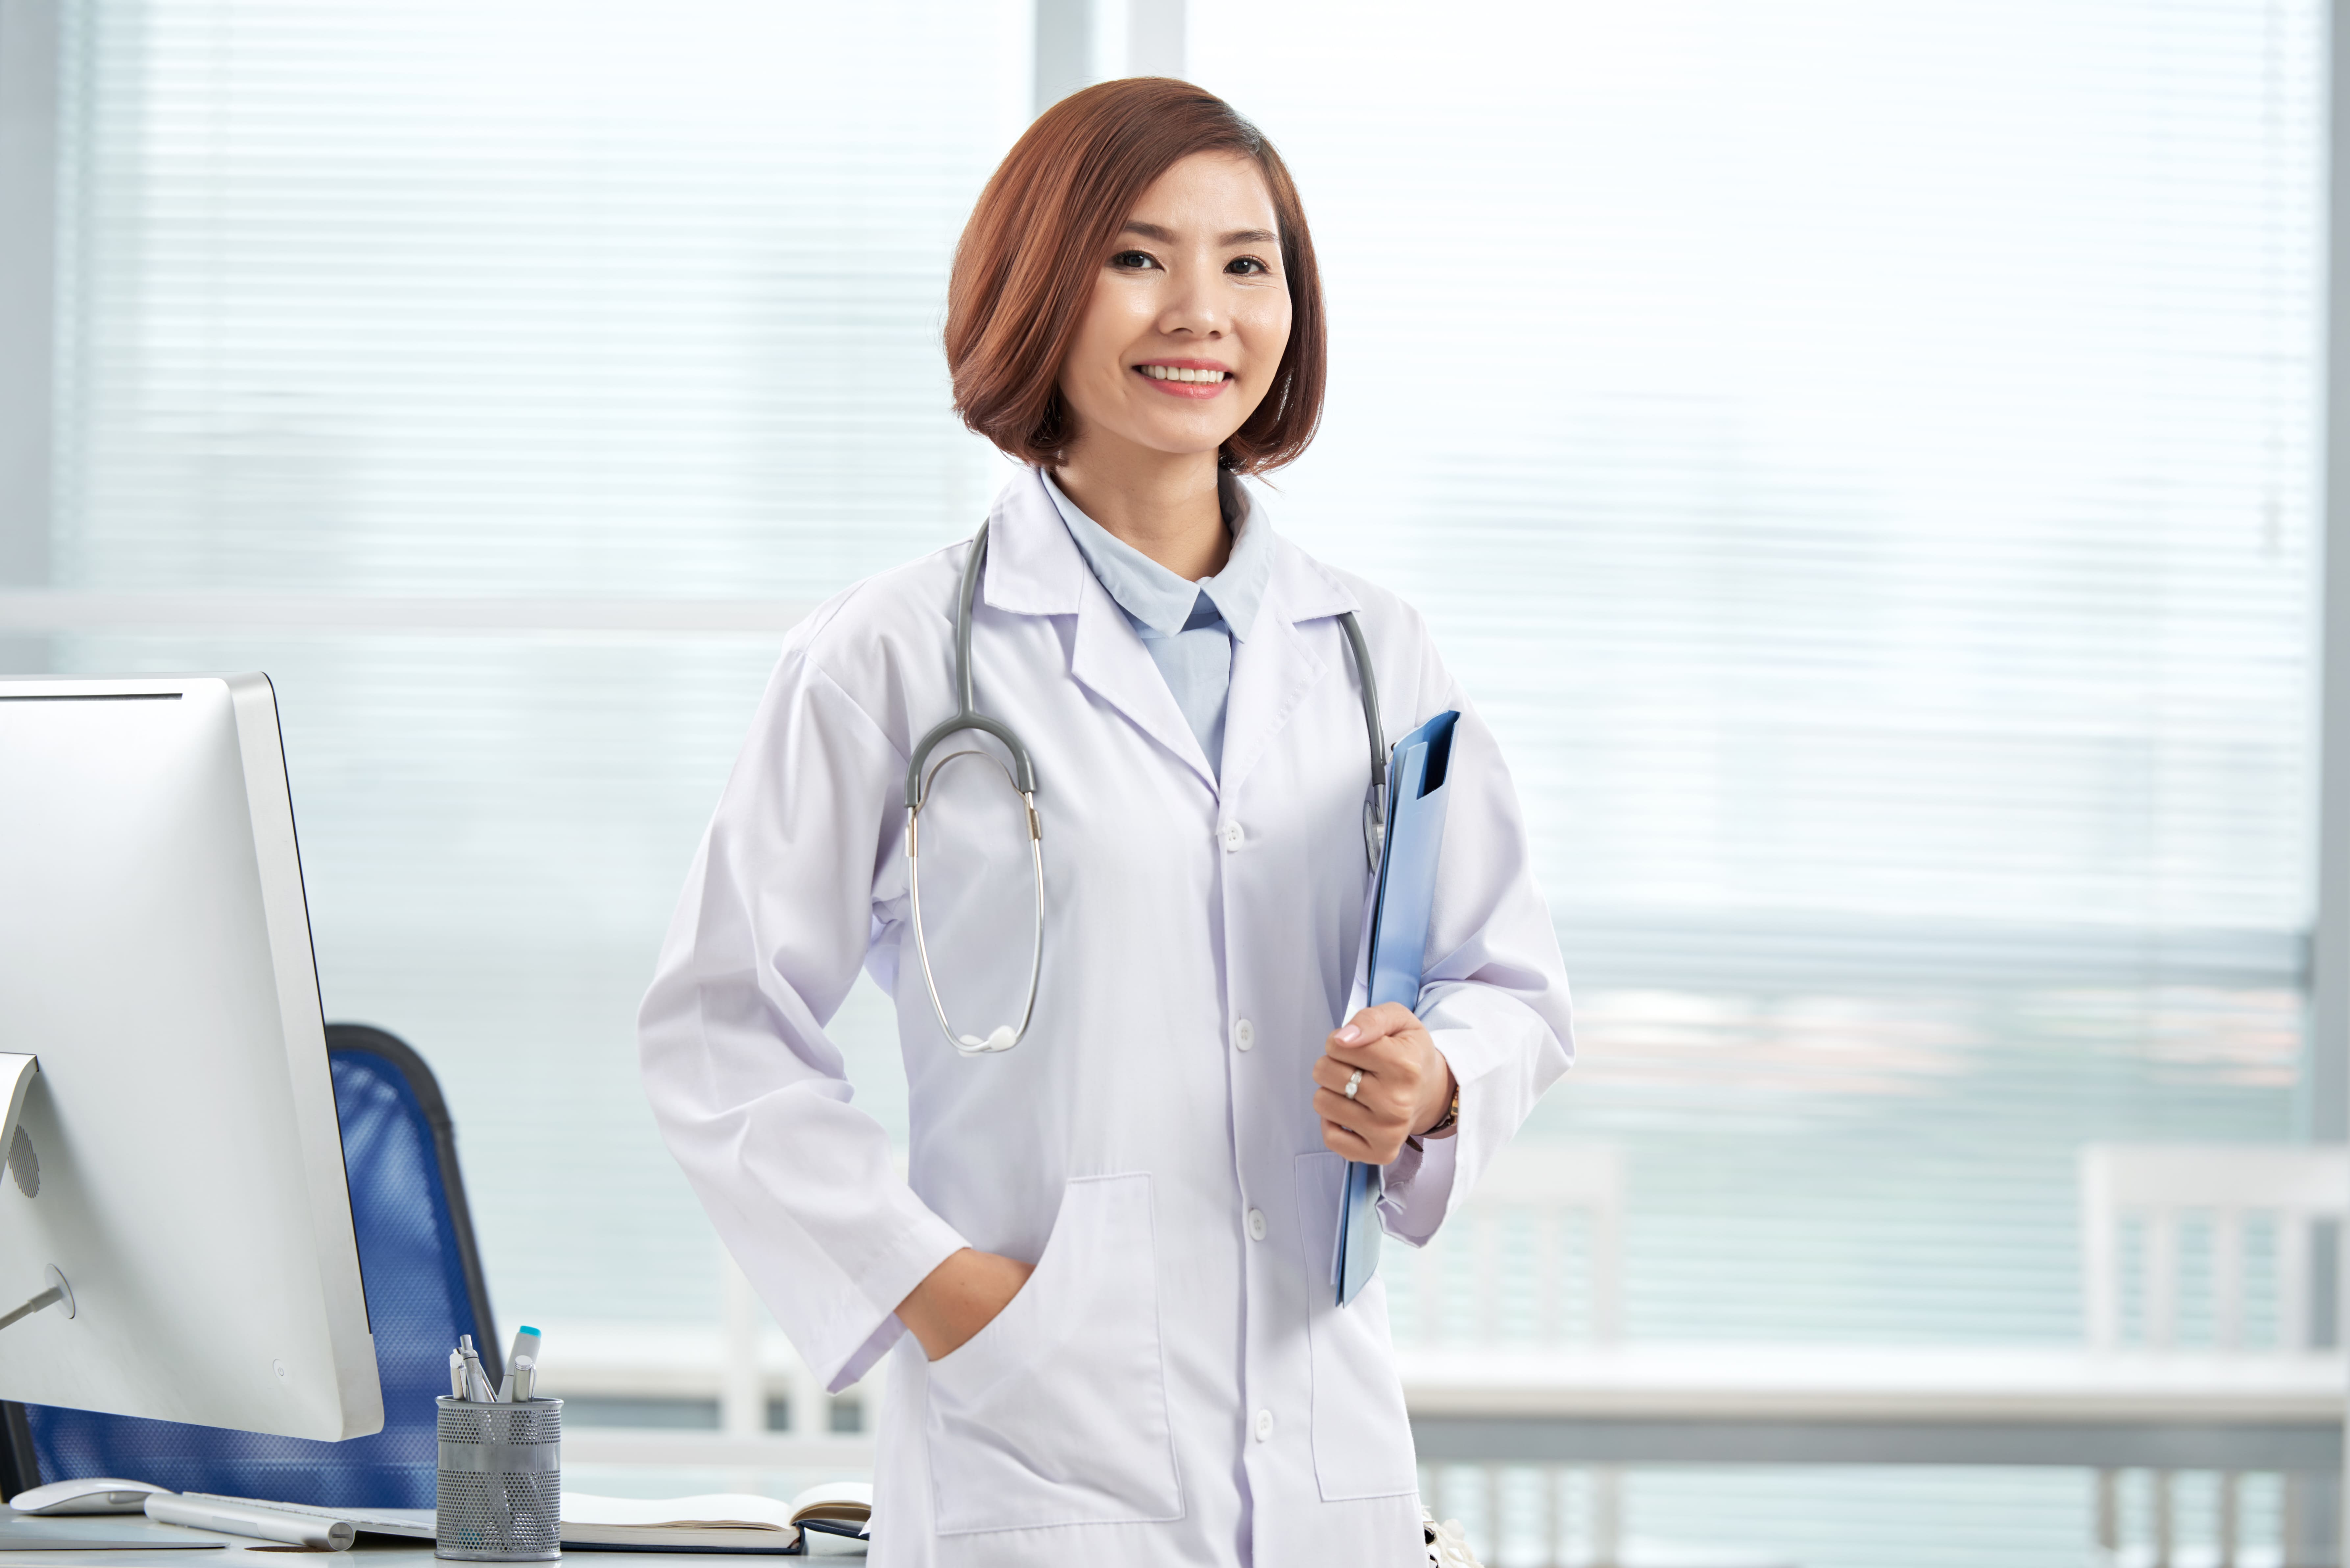 smiling-pretty-doctor-standing-hospital-office-with-paper-folder